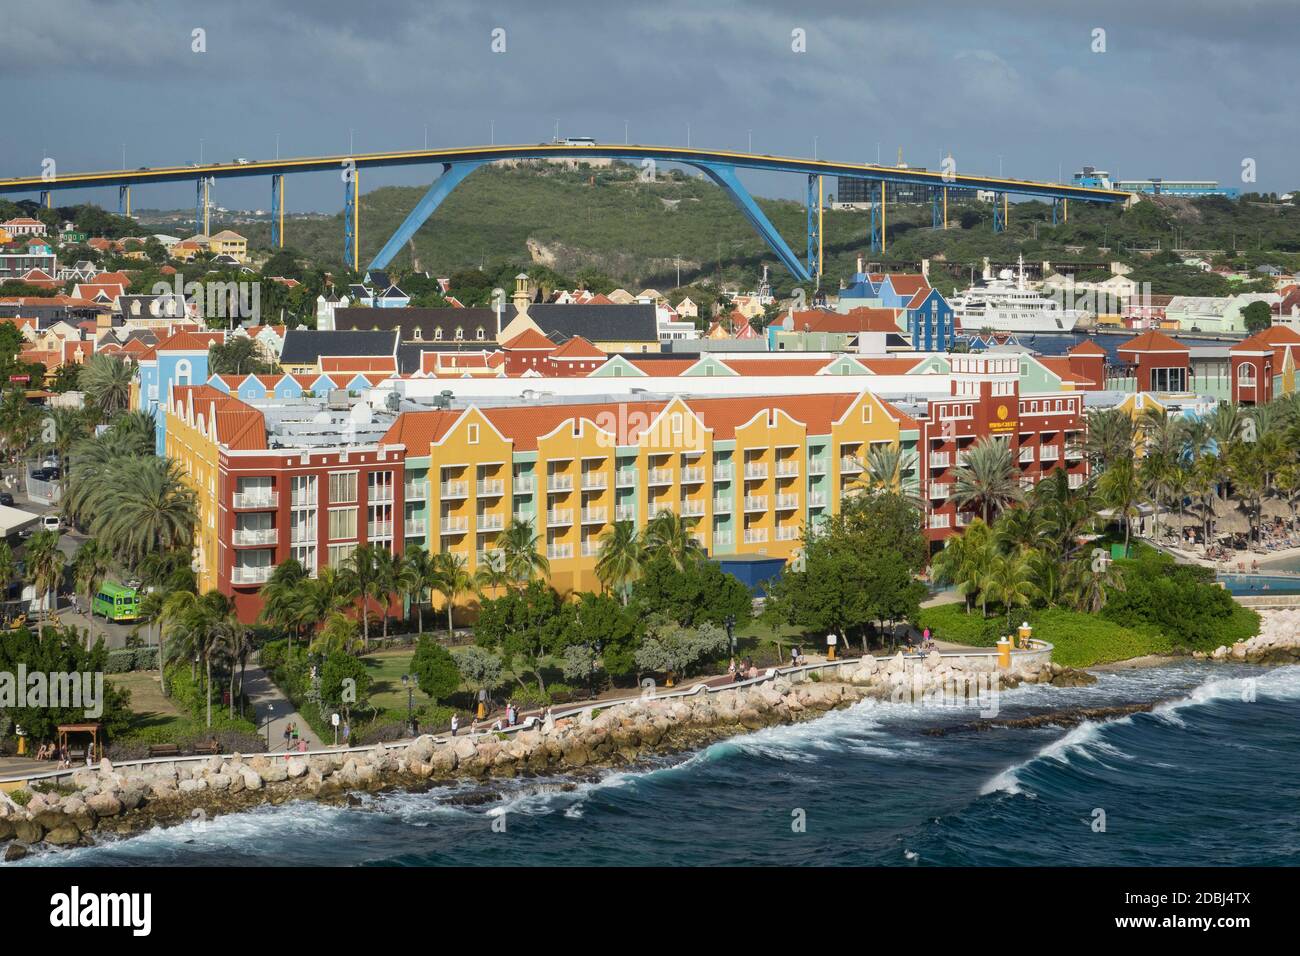 Queen Juliana Bridge and Rif Fort, Willemstad, Curacao, Lesser Antilles, Caribbean, Central America Stock Photo